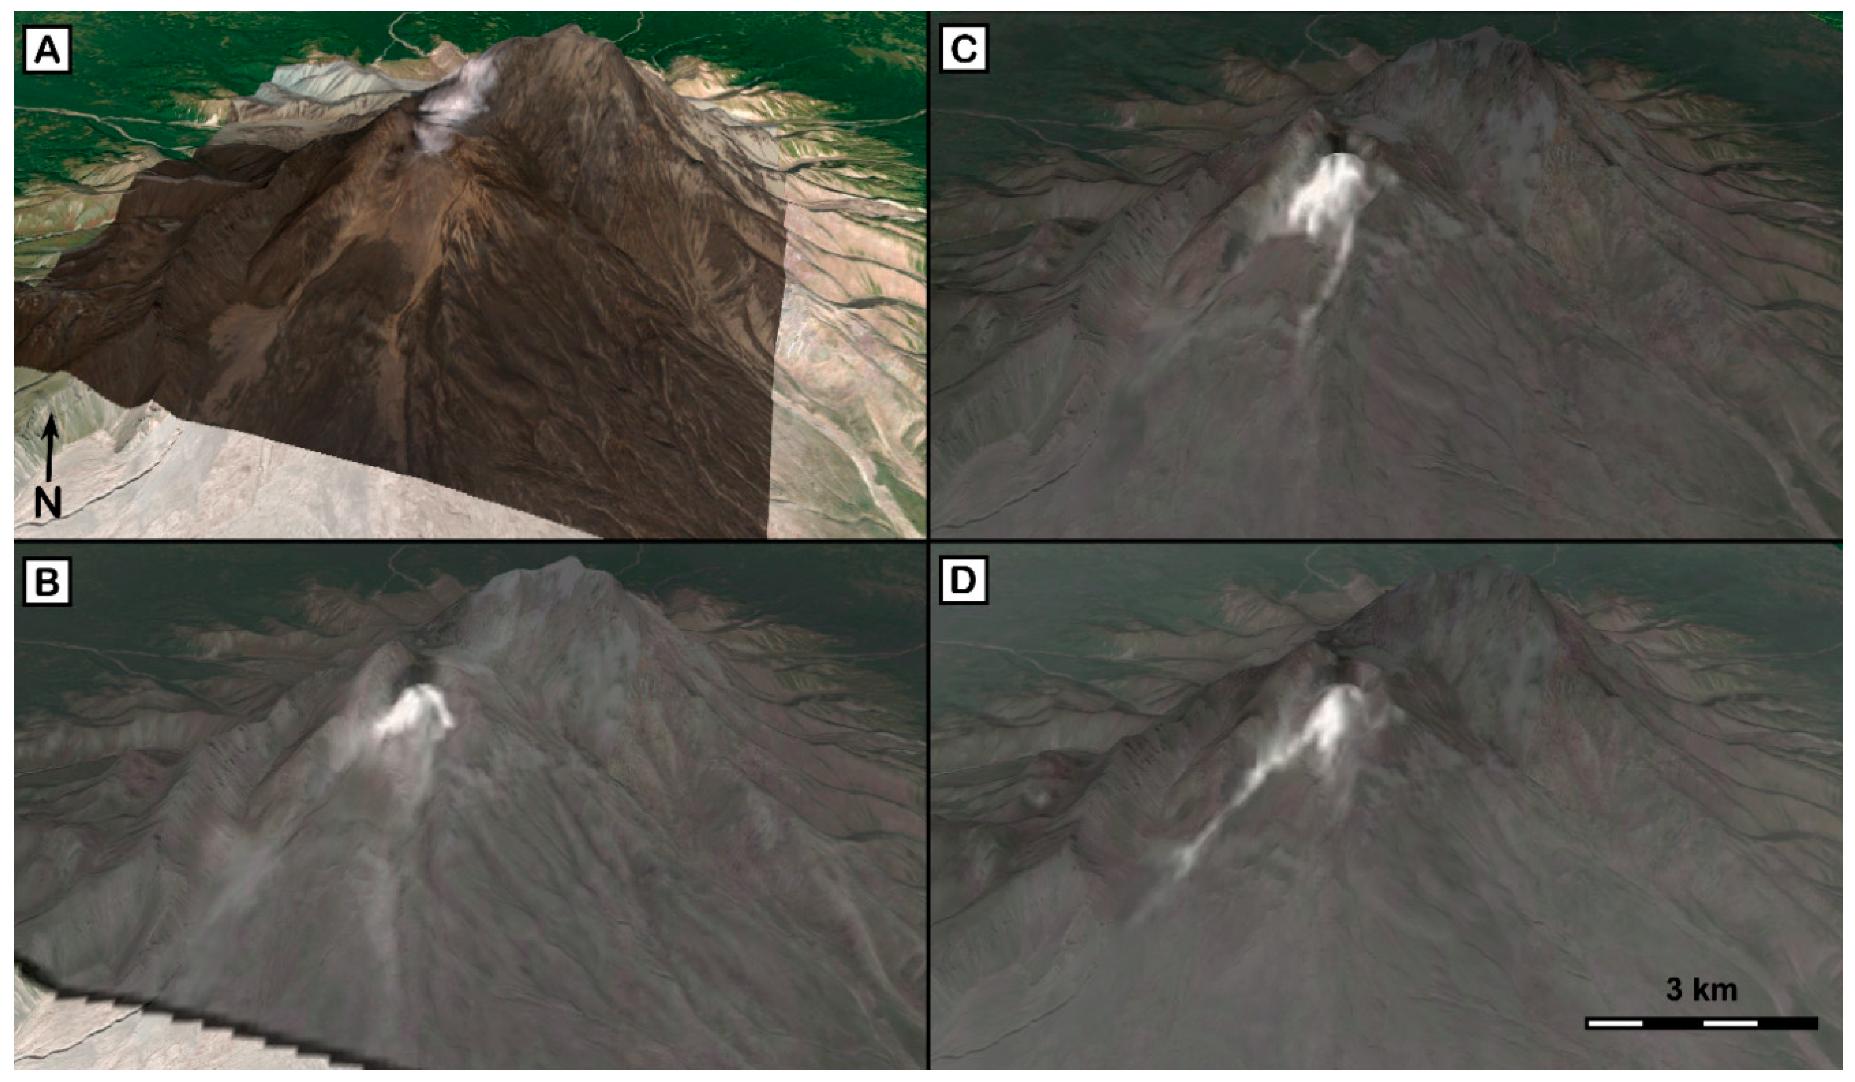 Remote Sensing | Free Full-Text | The Spatial and Spectral Resolution of  ASTER Infrared Image Data: A Paradigm Shift in Volcanological Remote Sensing